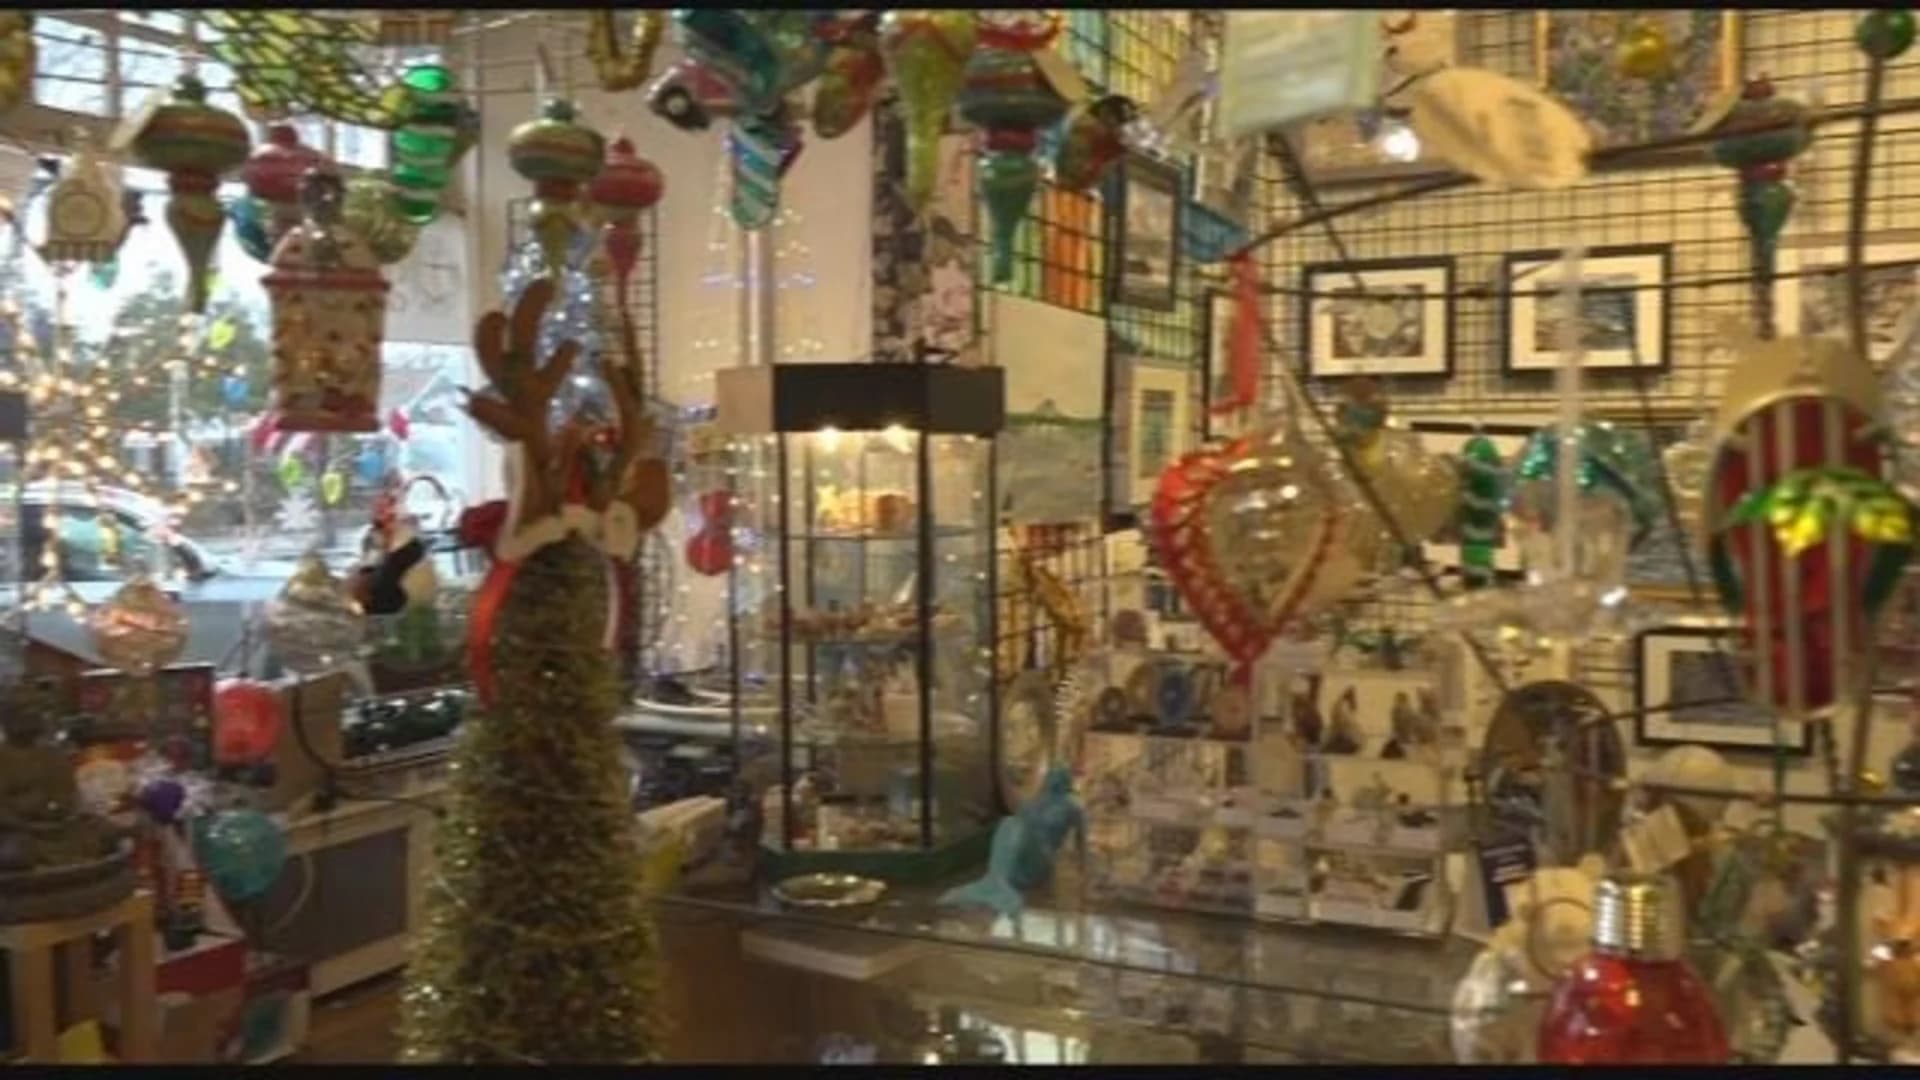 Bronx spots offer unique holiday gifts for last-minute shoppers